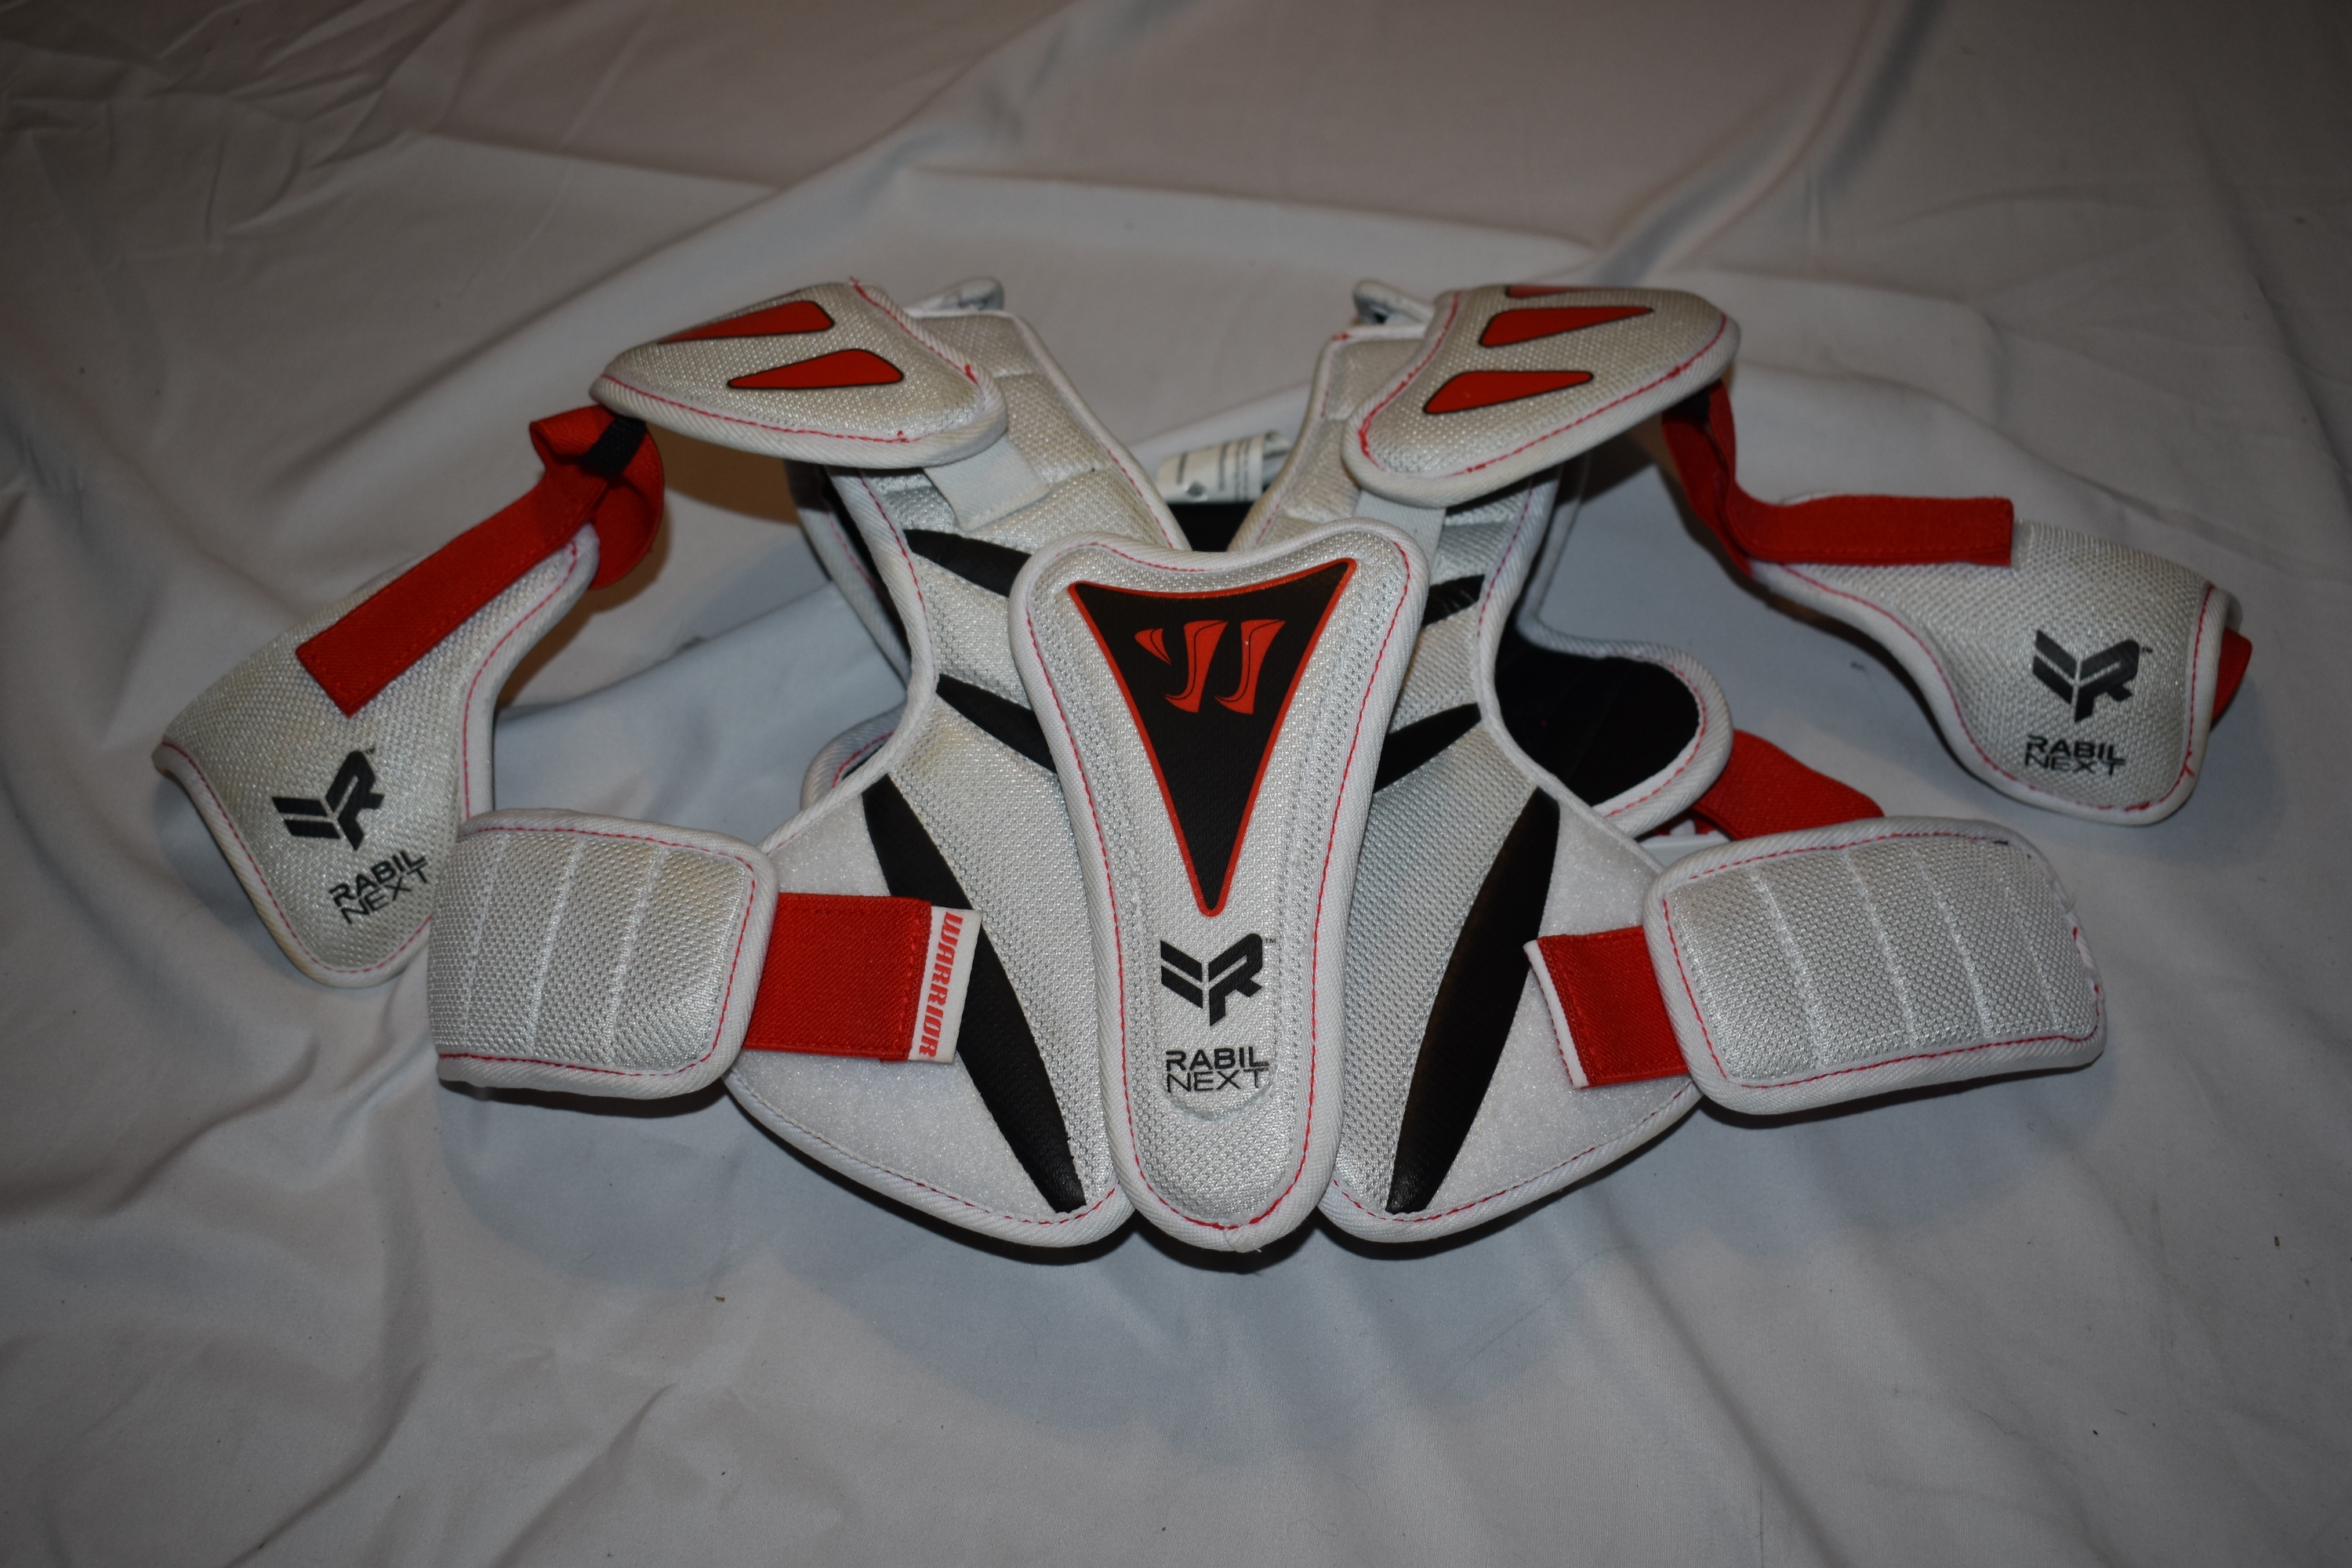 Warrior Rabil Next Lacrosse Shoulder Pads, Youth Small - Great Condition!